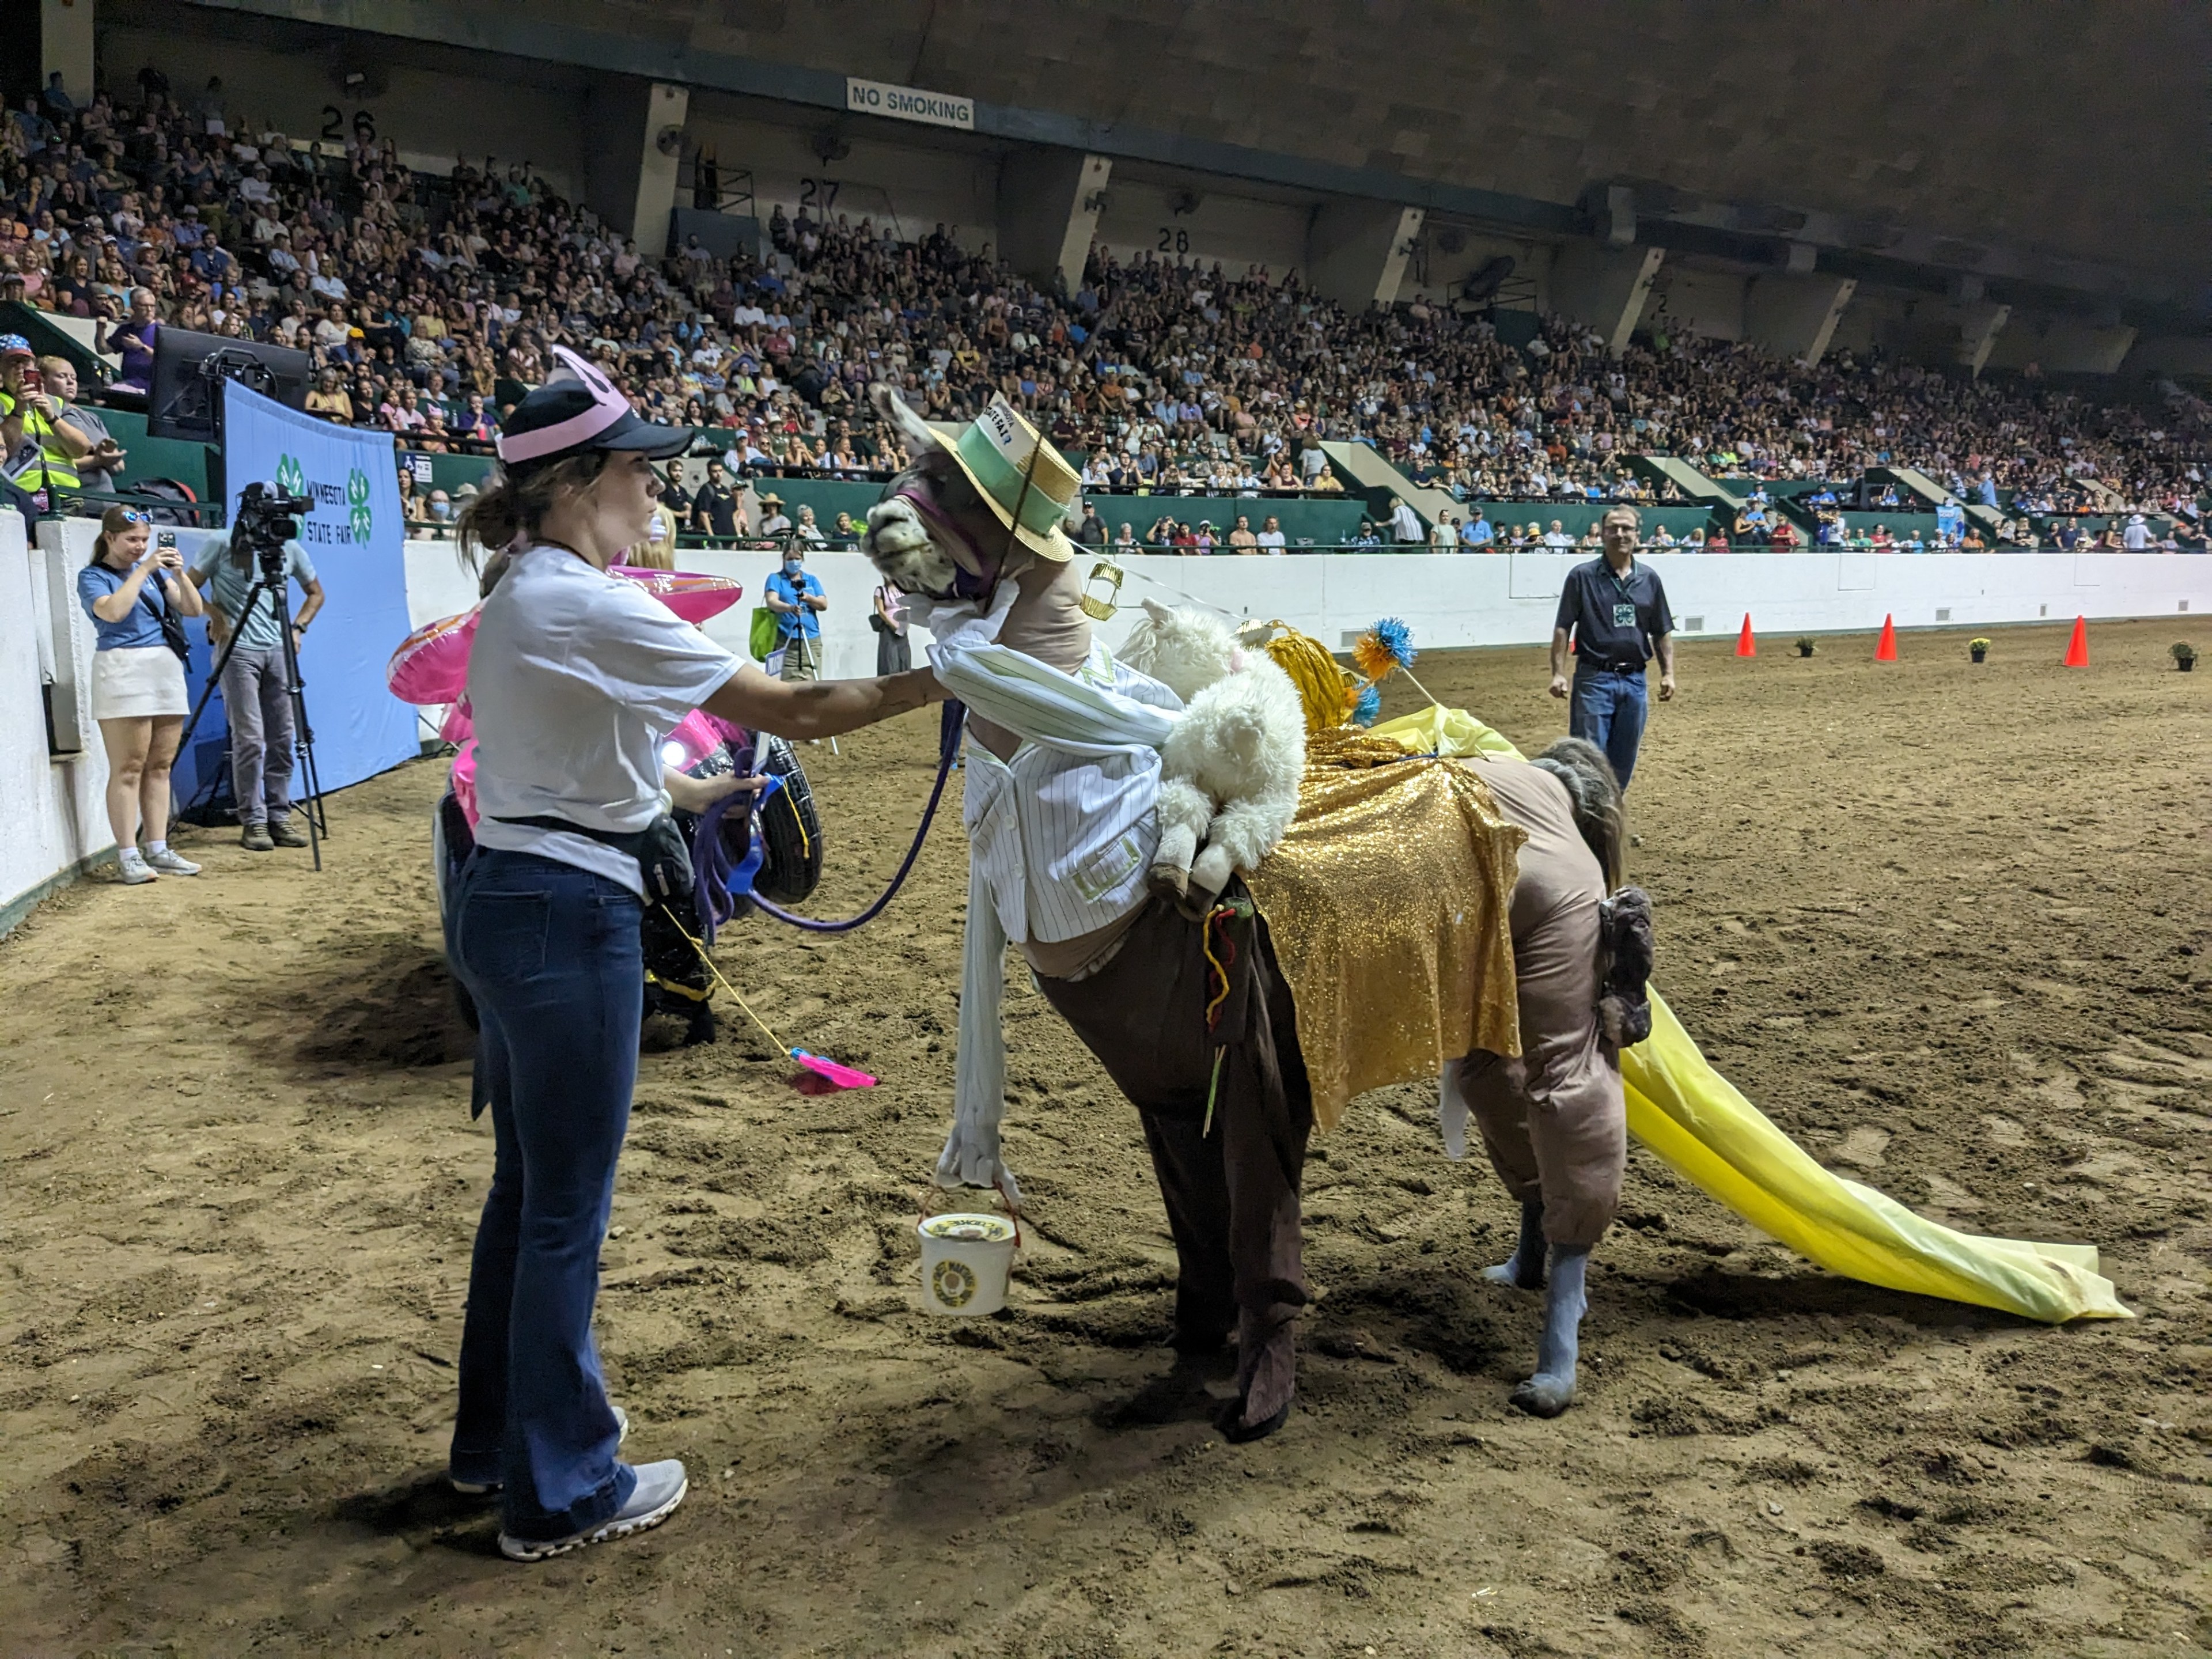 A child and llama competing in the Llama-Alpaca Costume Contest at the Minnesota State Fair.